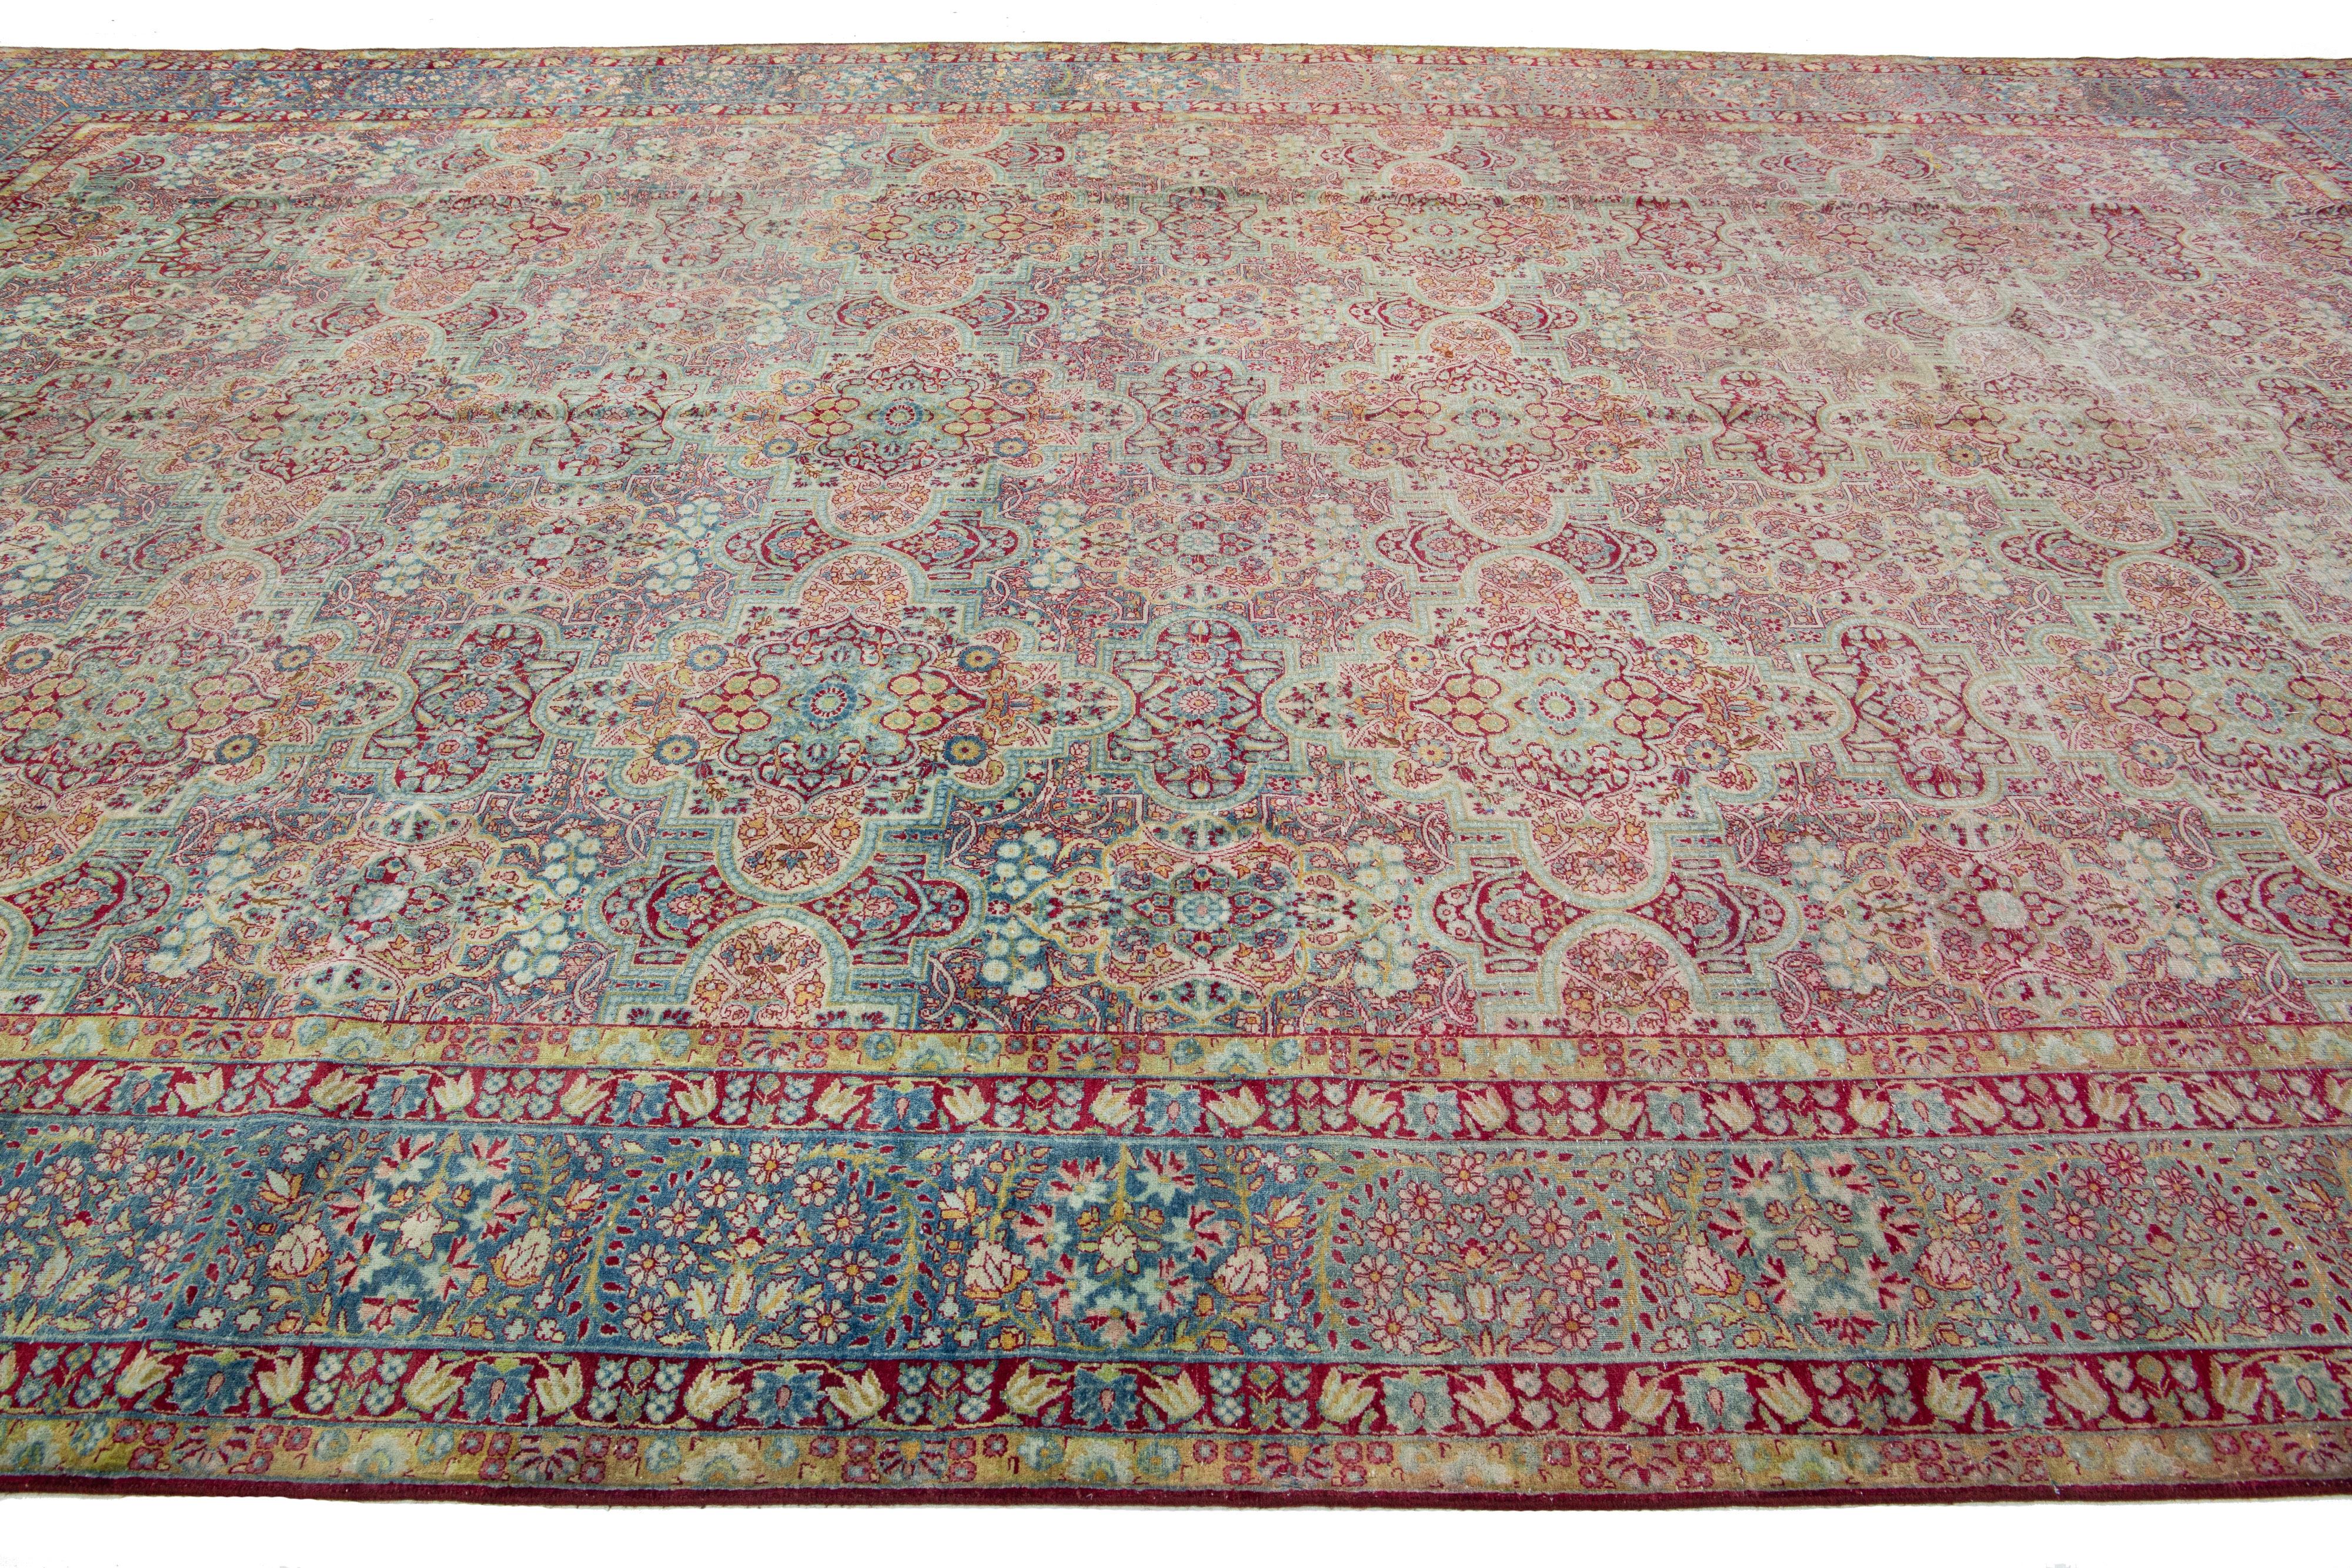 Blue Persian Tabriz Antique Wool Rug with Allover Floral Motif from the 1900's In Excellent Condition For Sale In Norwalk, CT